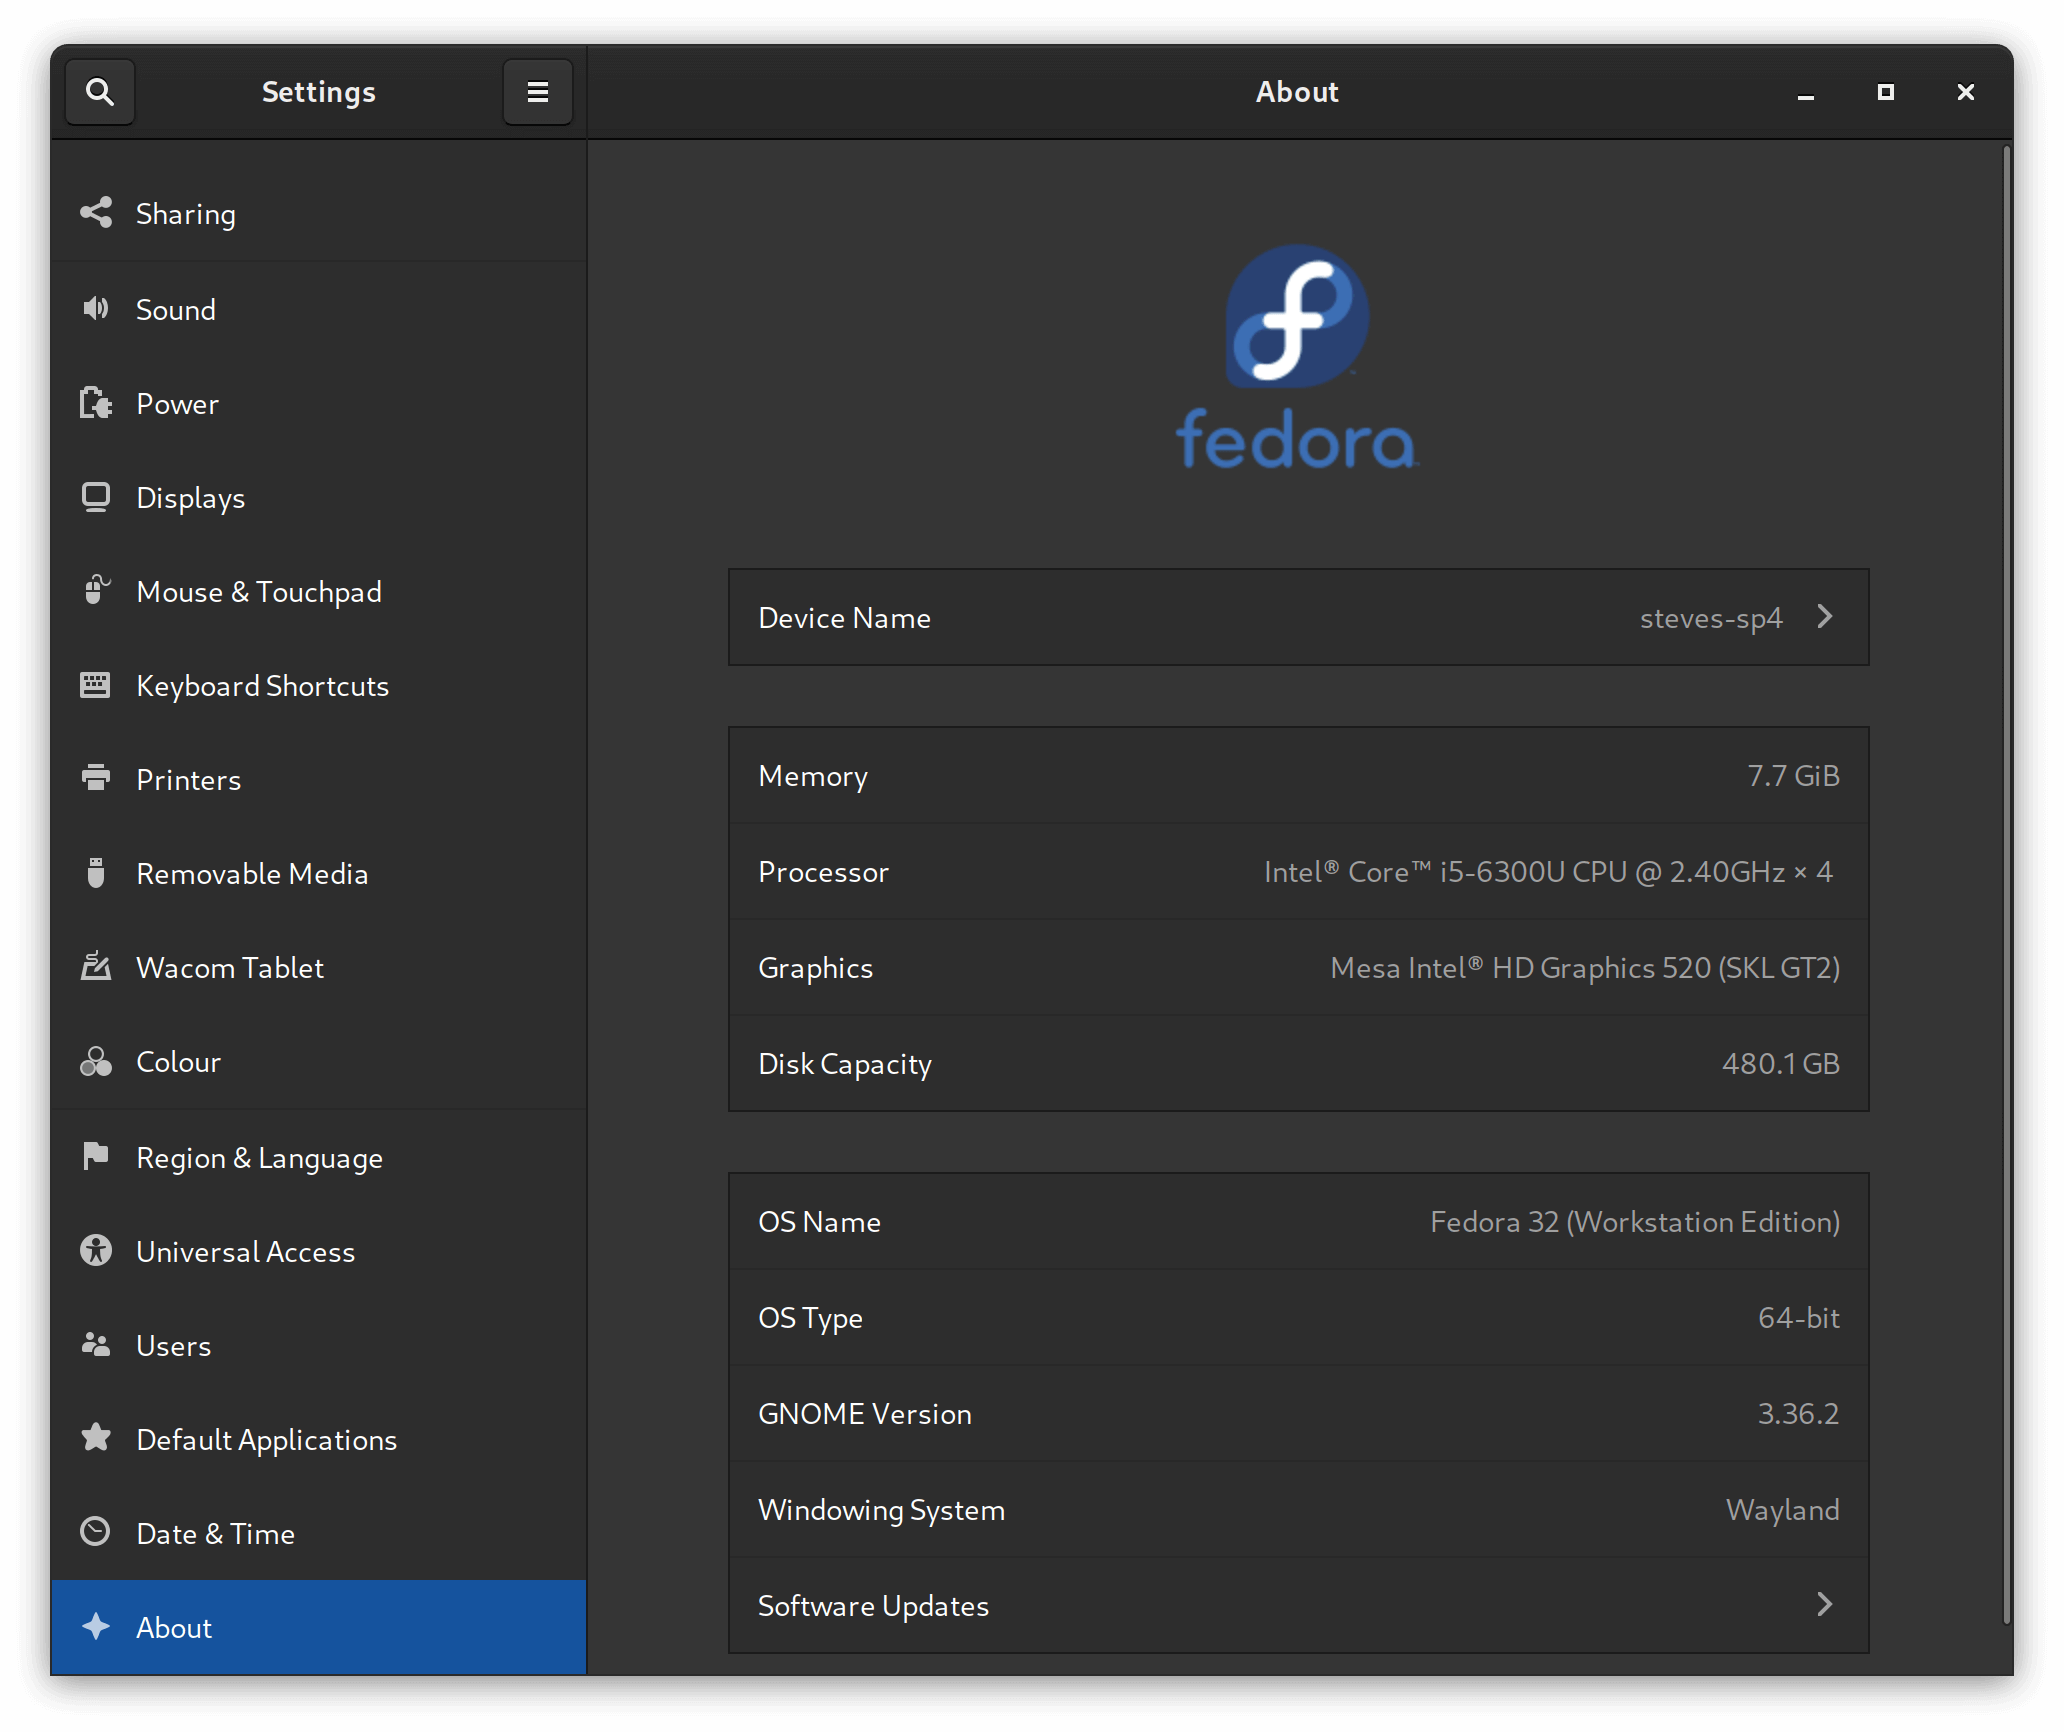 Fedora 32 on Surface Pro 4 - About Screen